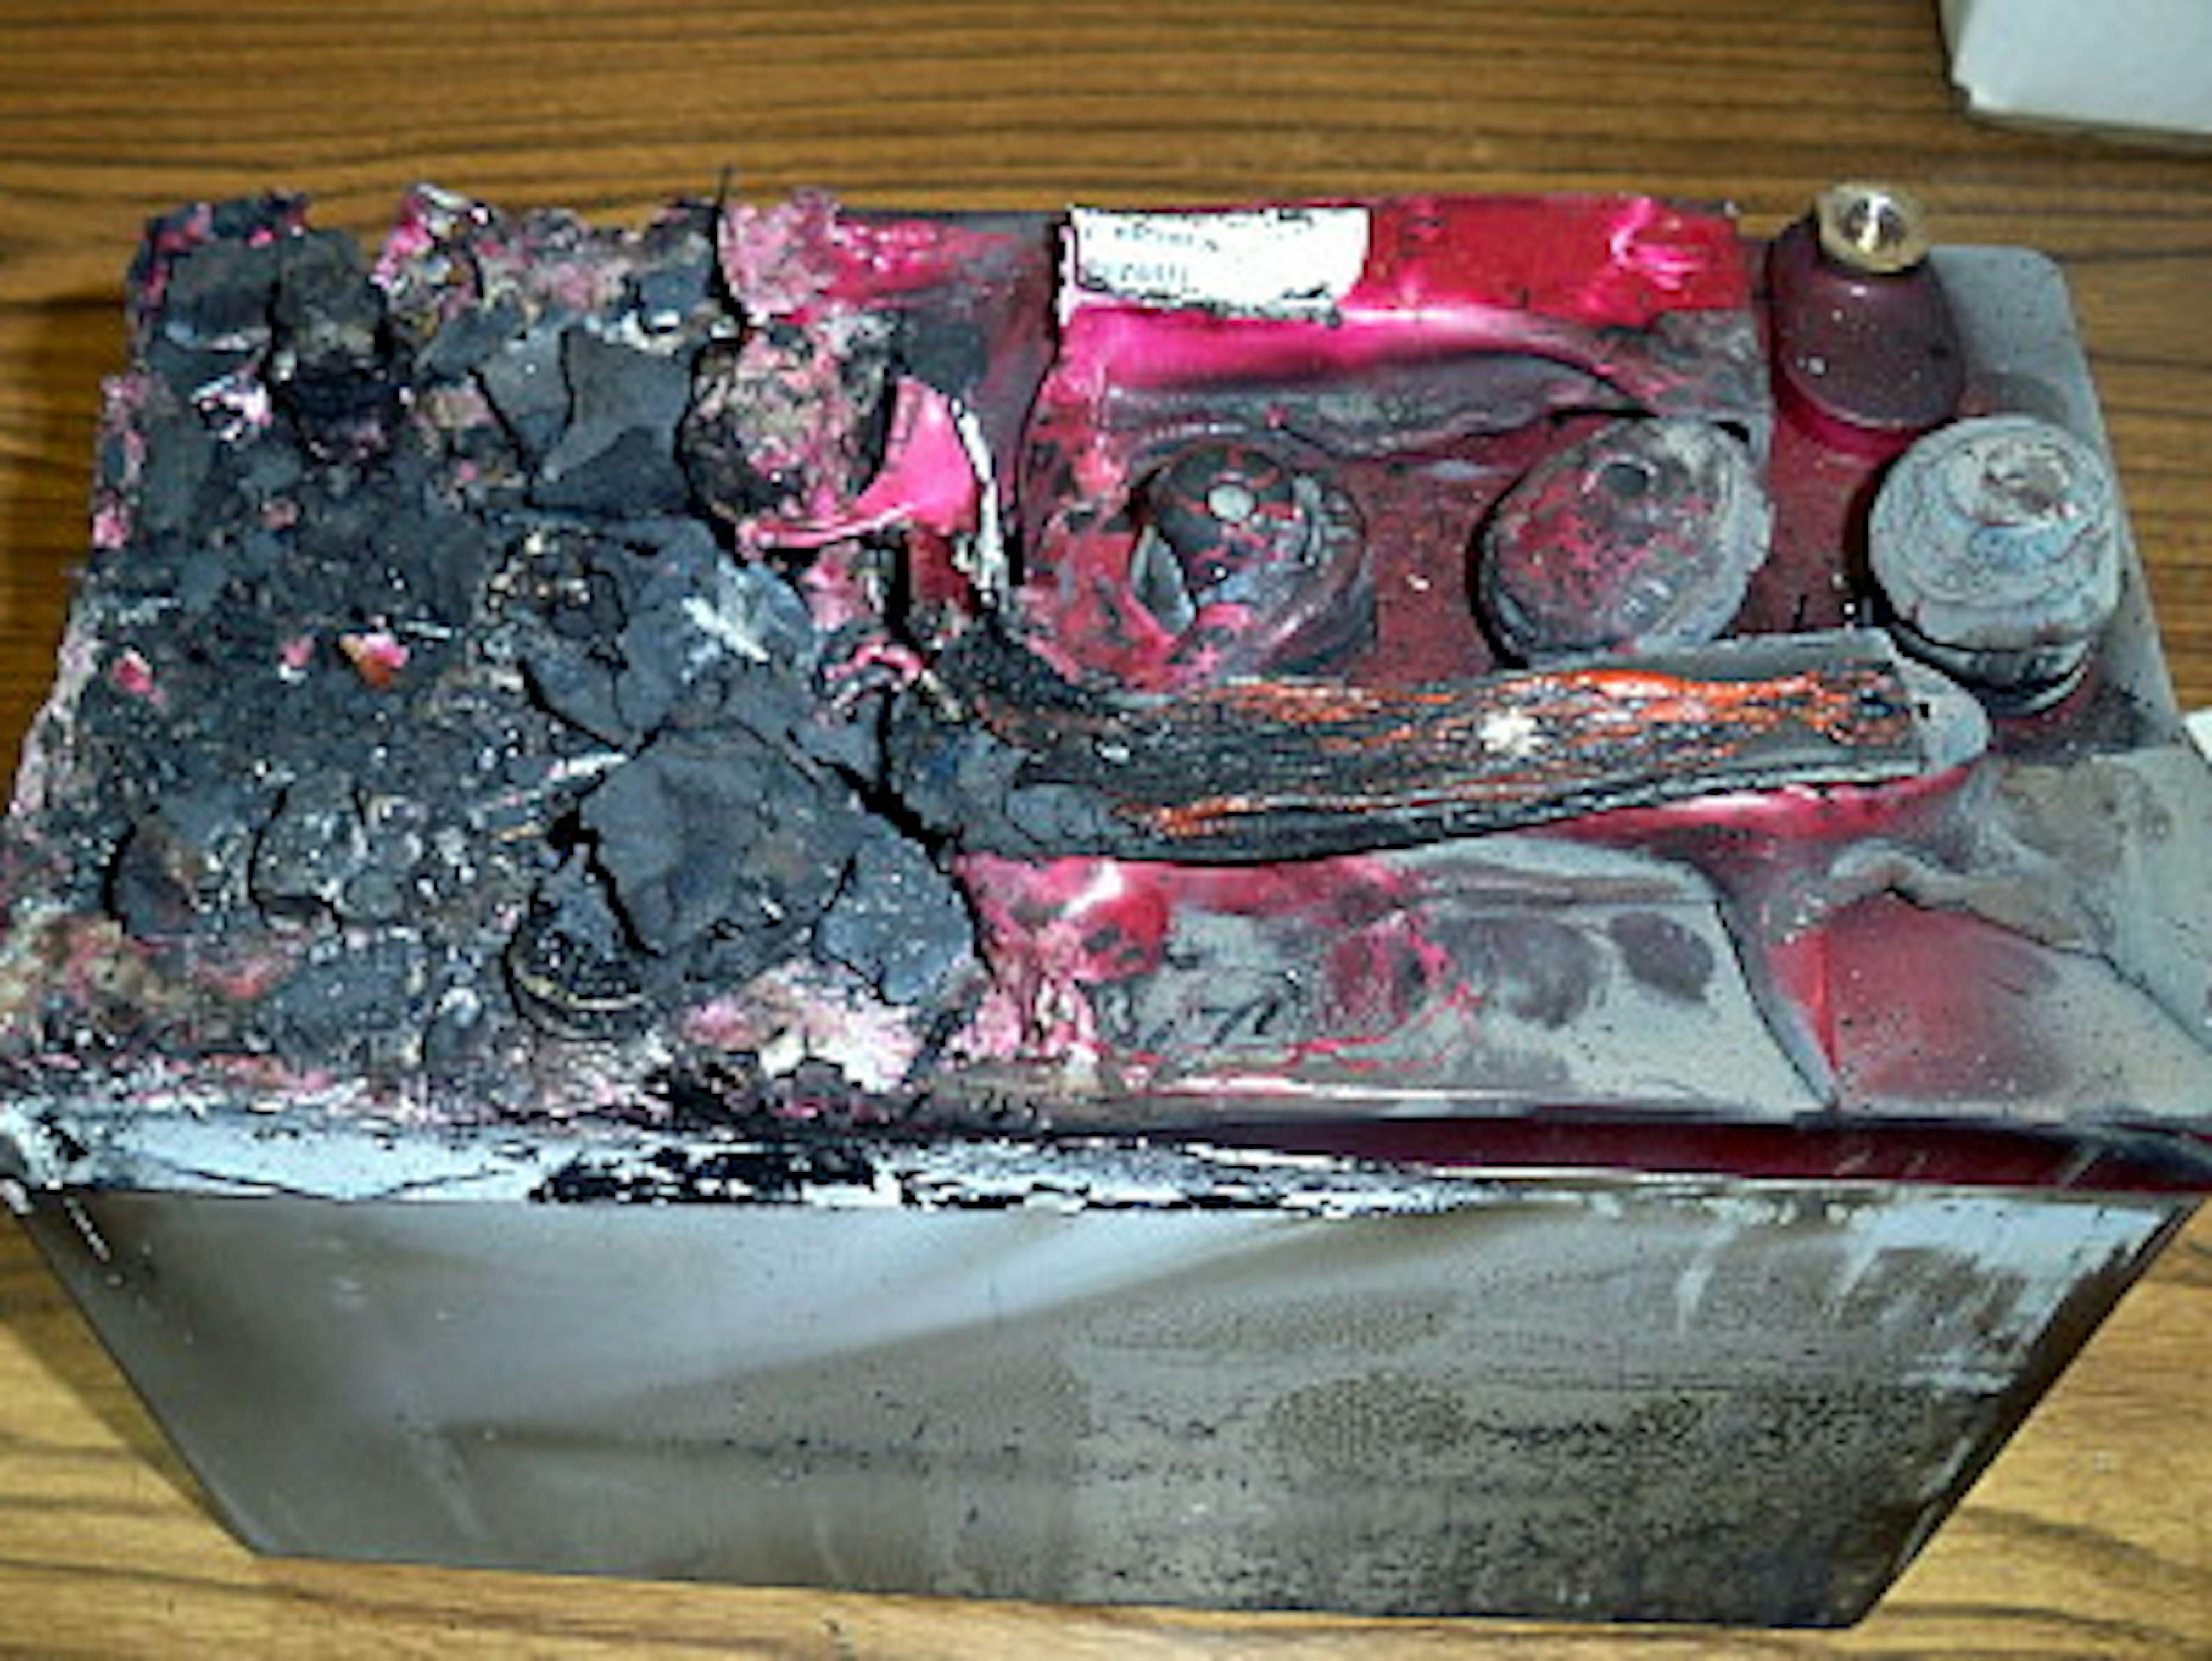 An exploded battery